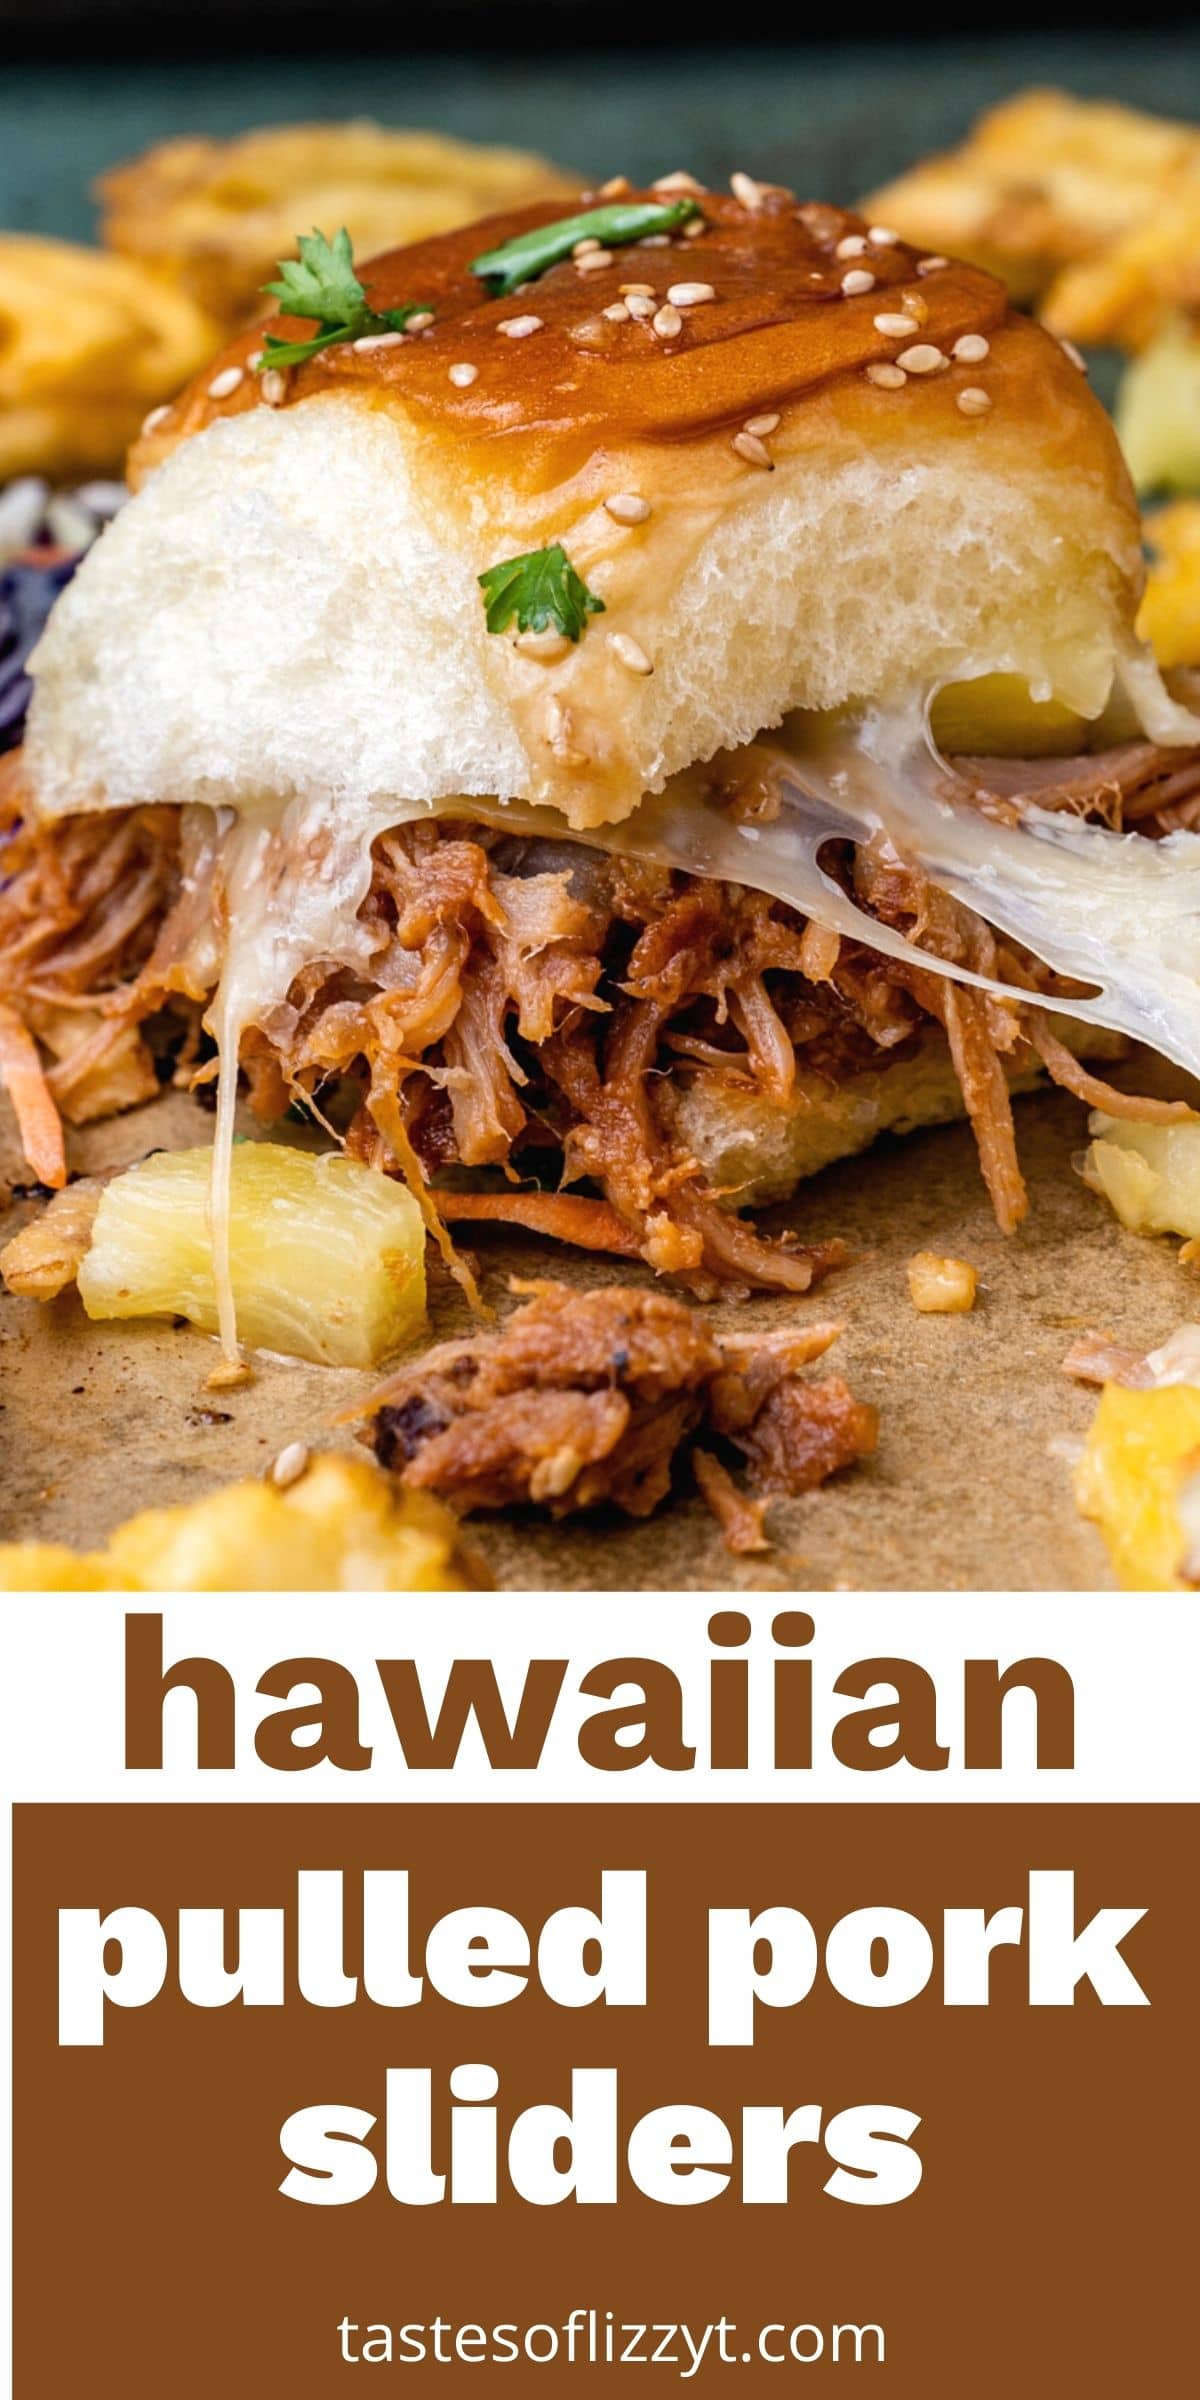 Hawaiian pulled pork sliders are a delicious sweet & spicy twist on classic pulled pork. It's a great way to use up leftover pulled pork. via @tastesoflizzyt